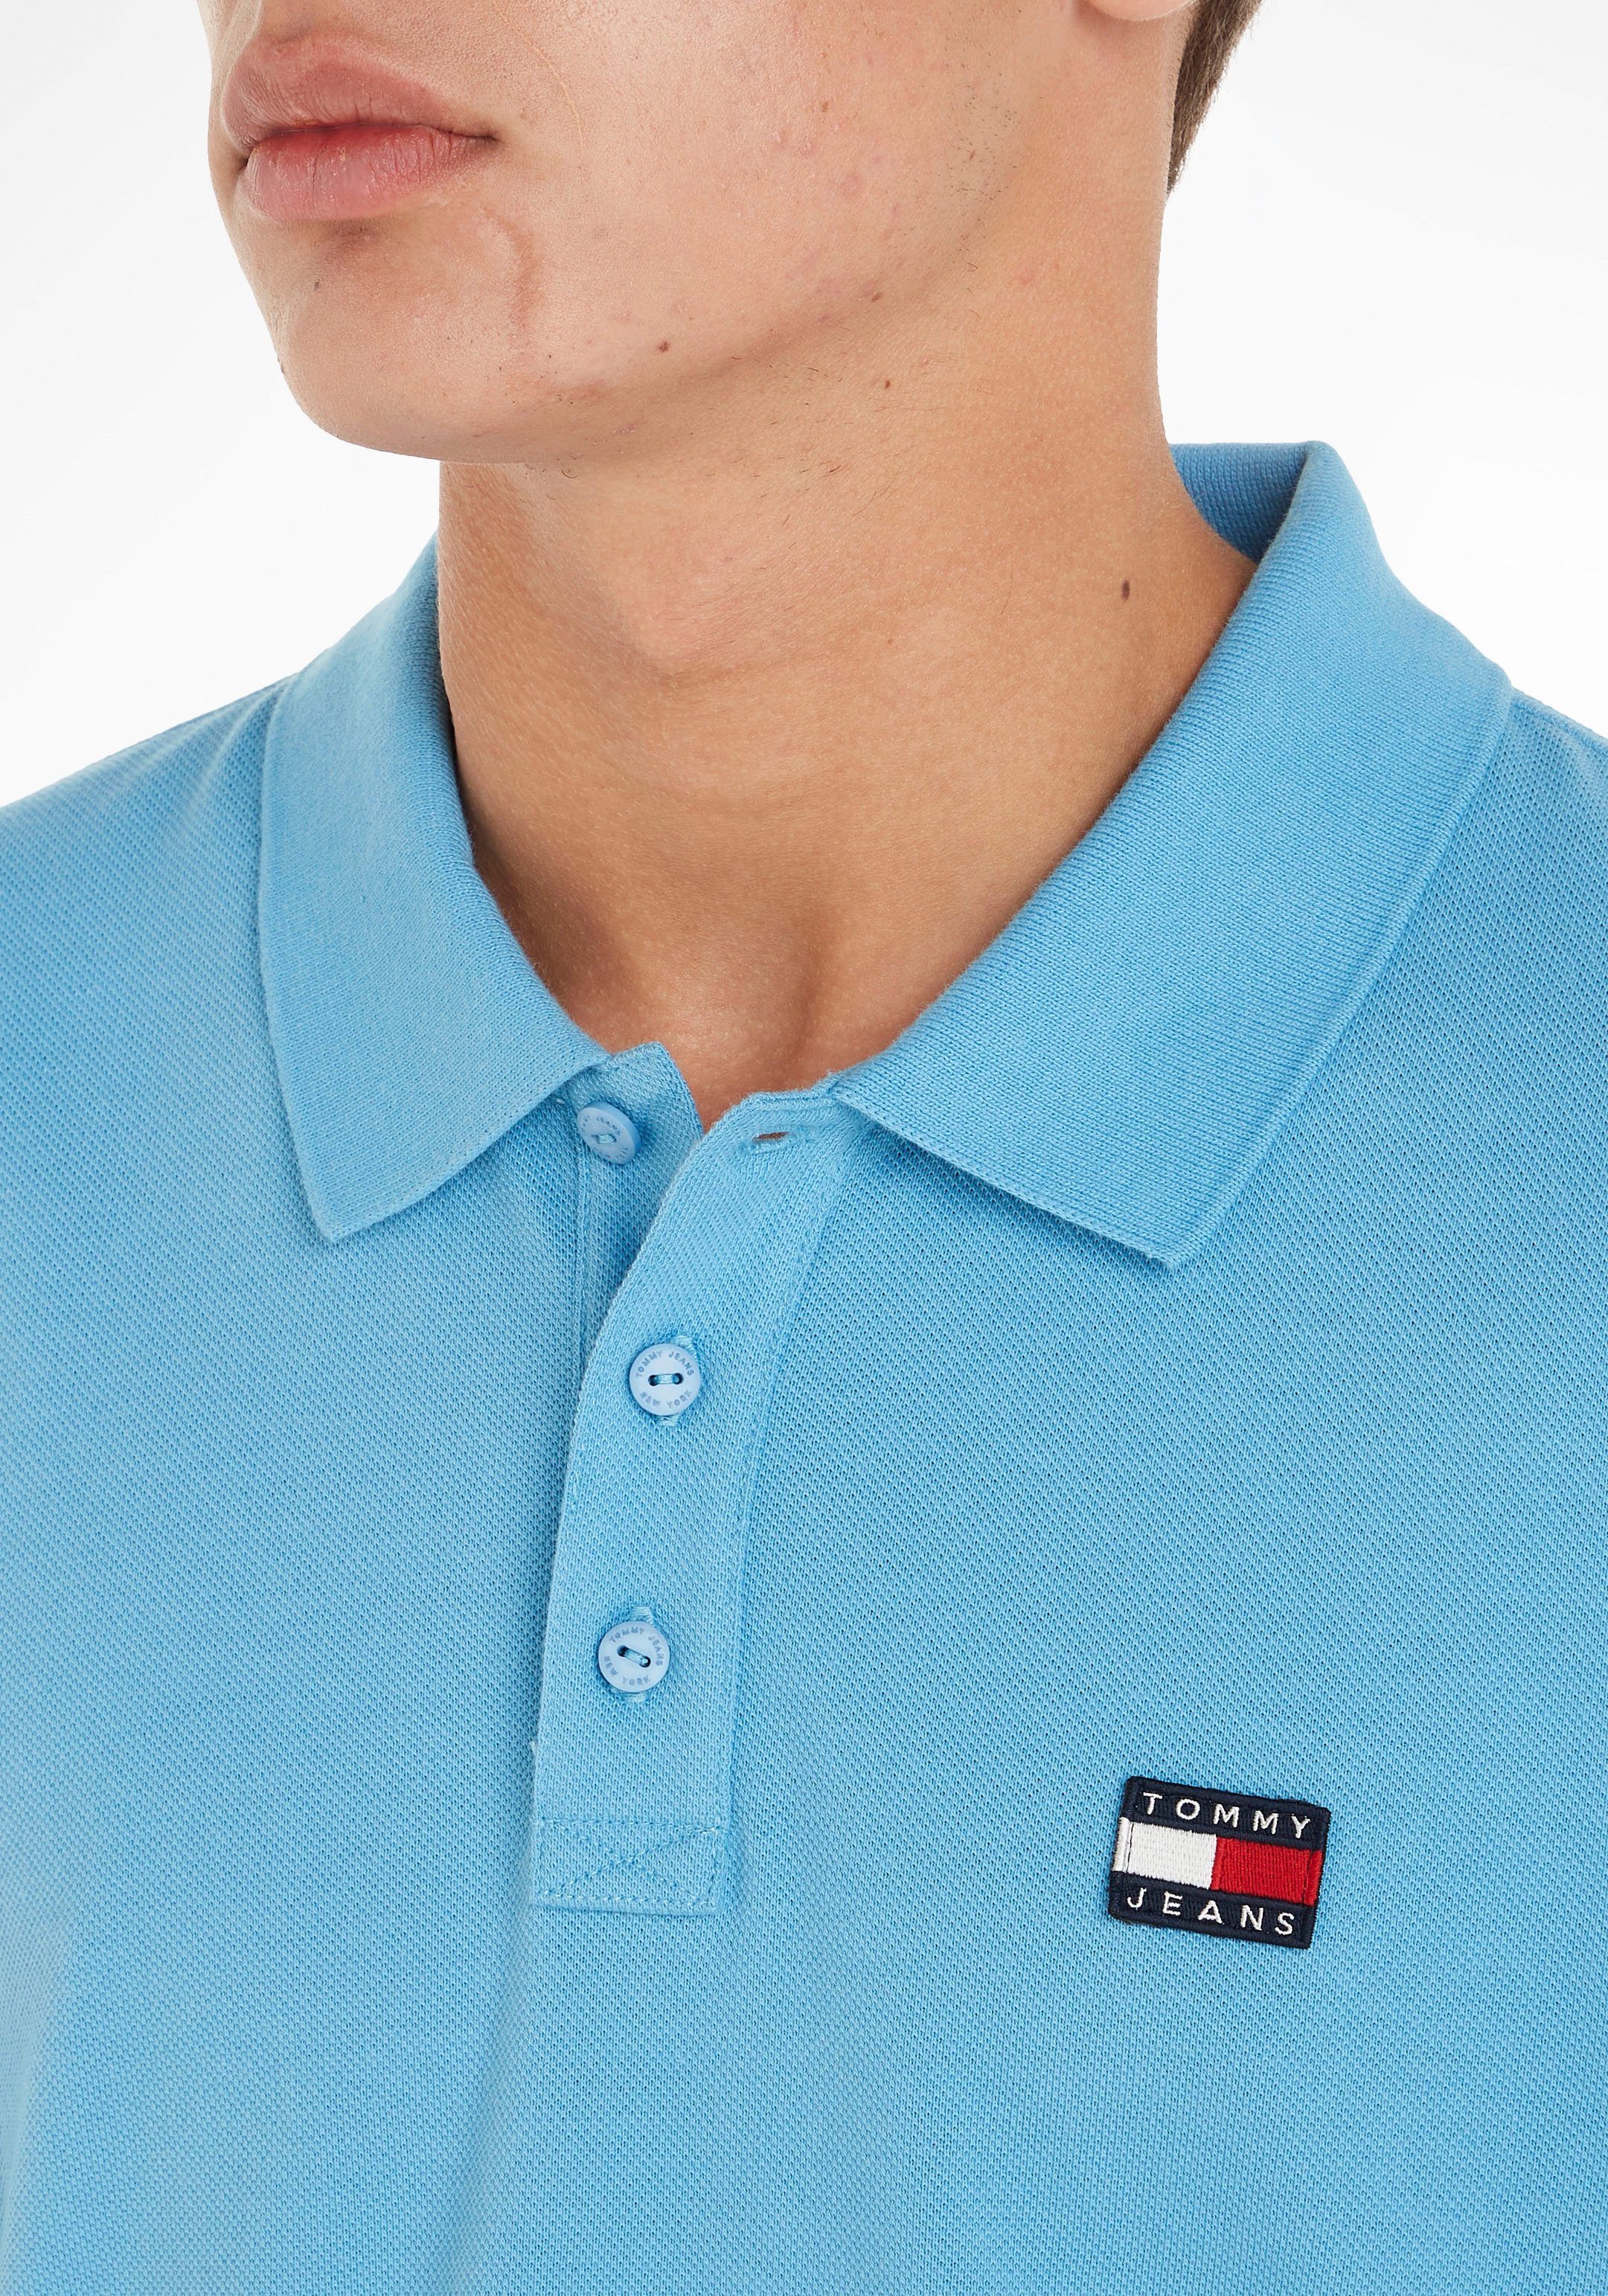 Skysail XS Poloshirt 3-Knopf-Form CLSC BADGE mit Tommy Jeans TJM POLO